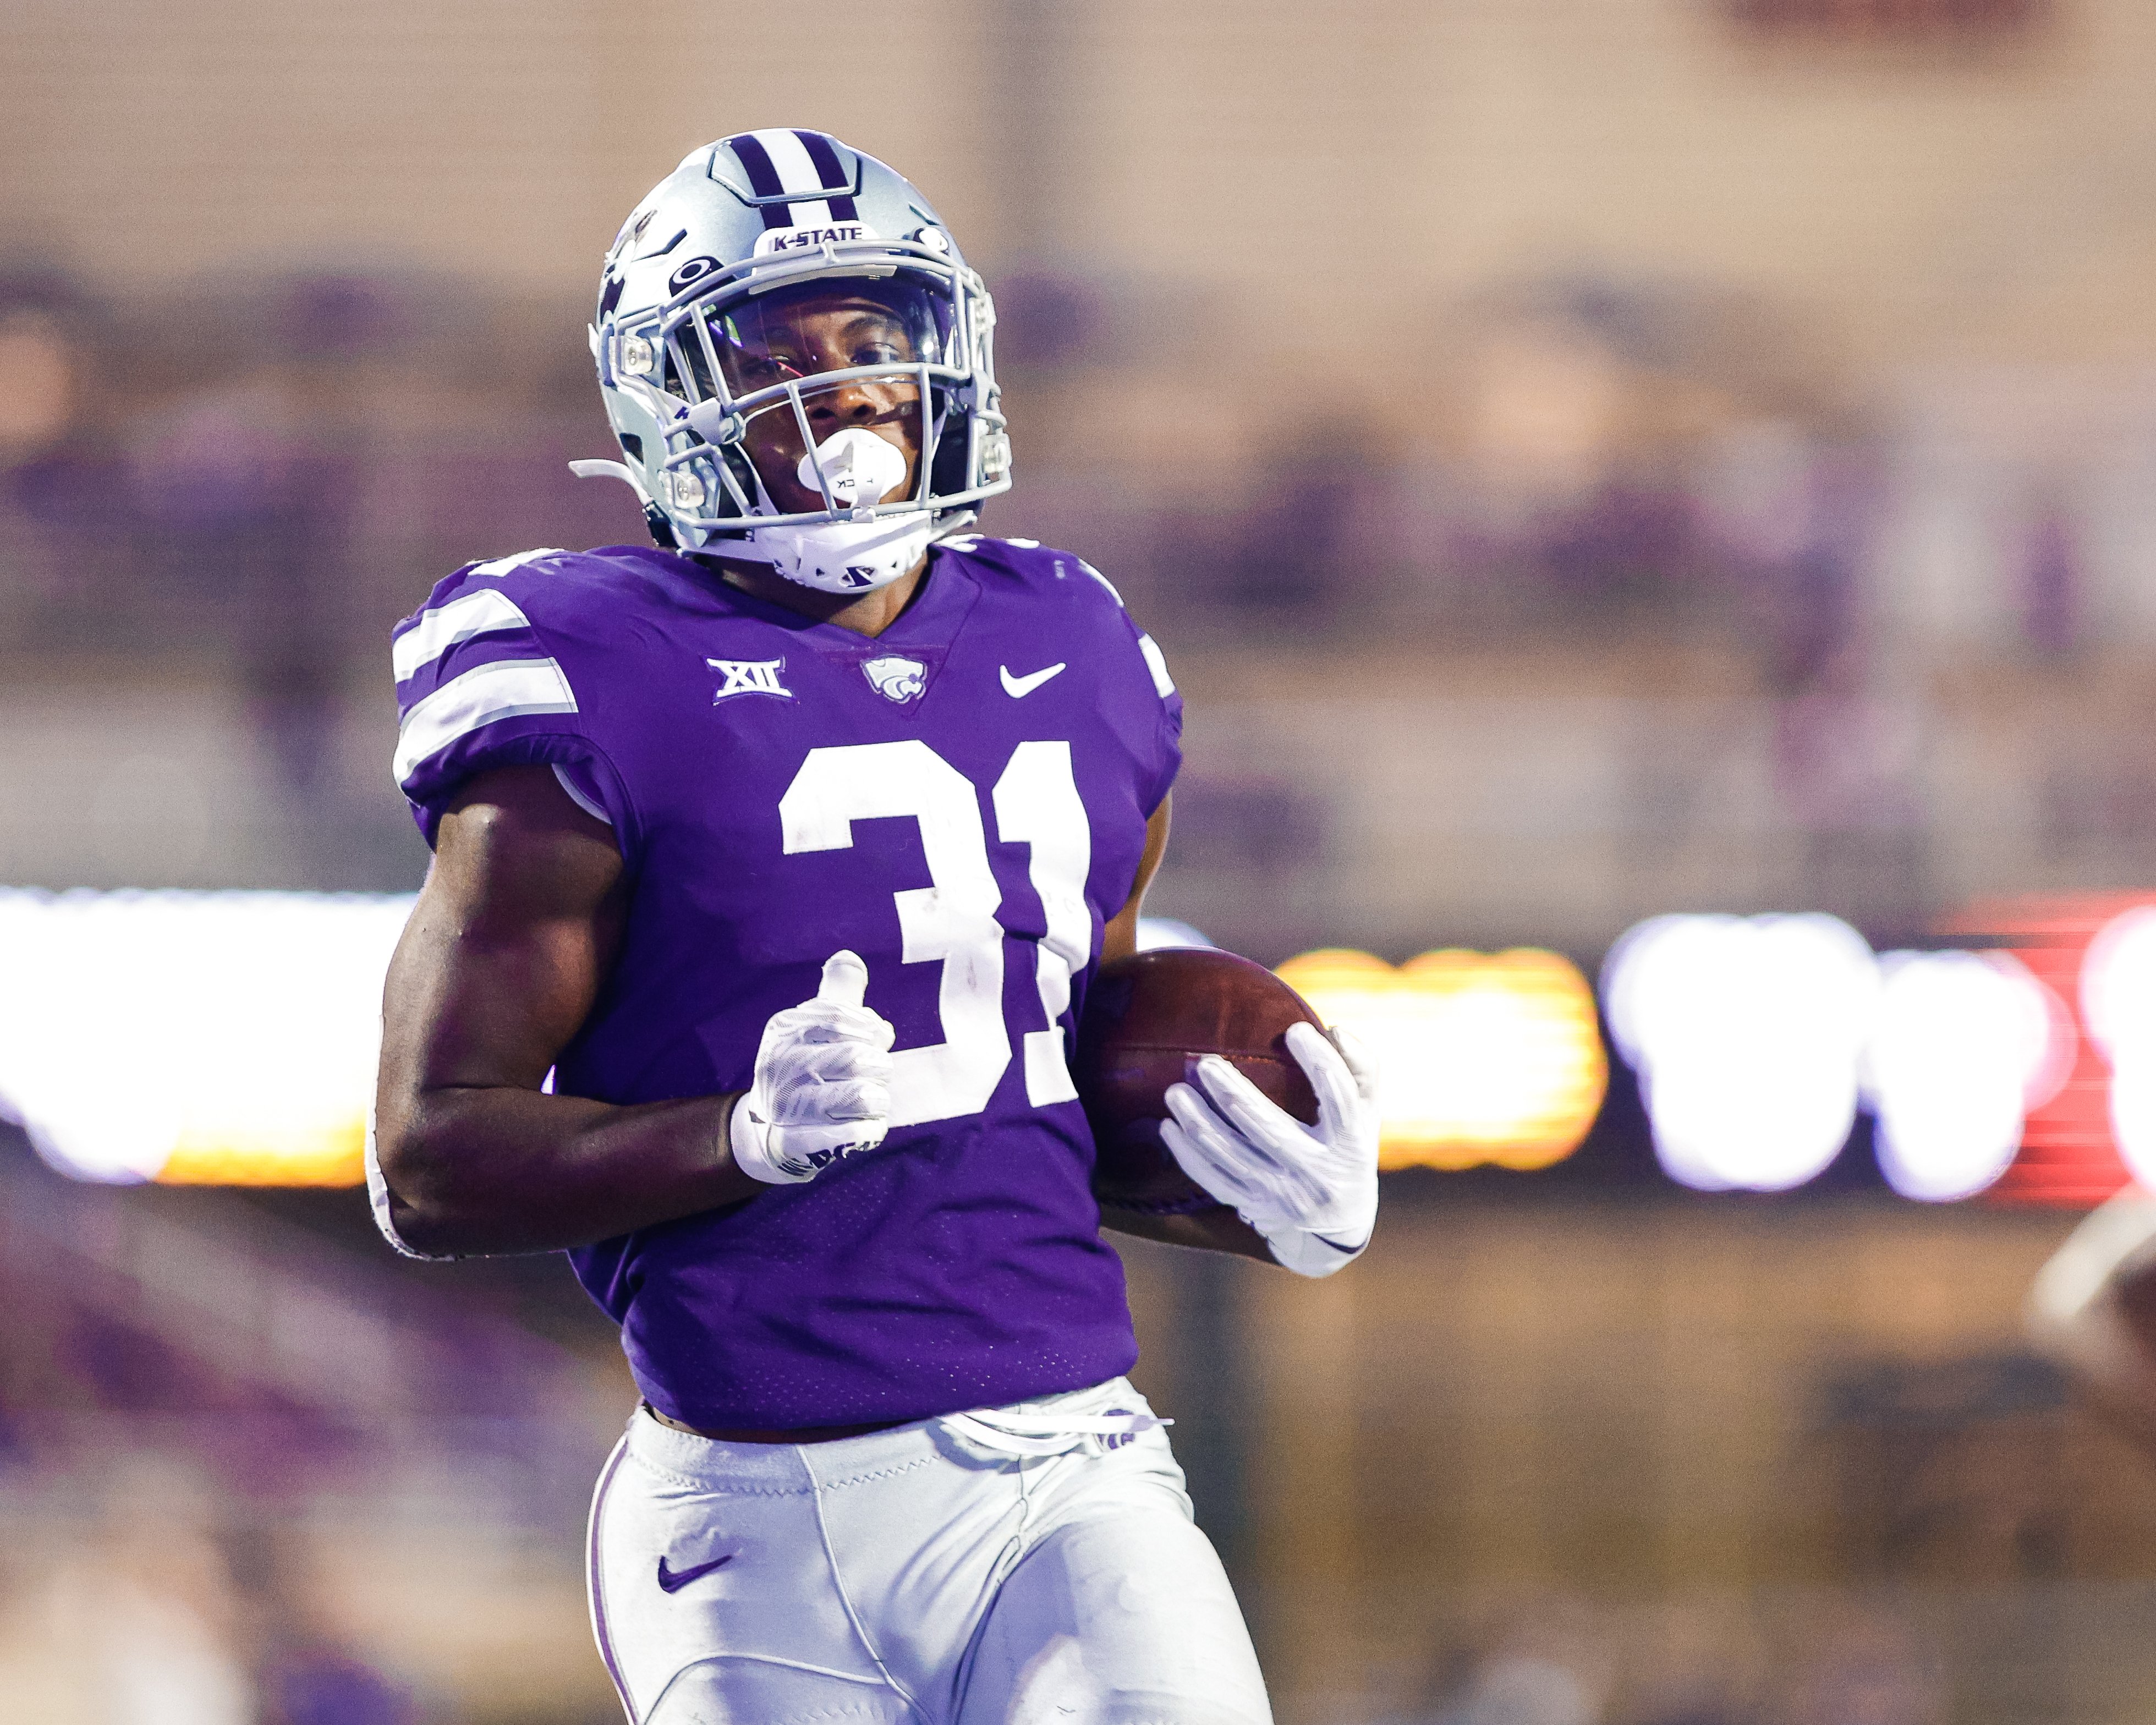 K-State Football on X: "First Career TD for DJ Giddens https://t.co/McNo3hGK3R" / X